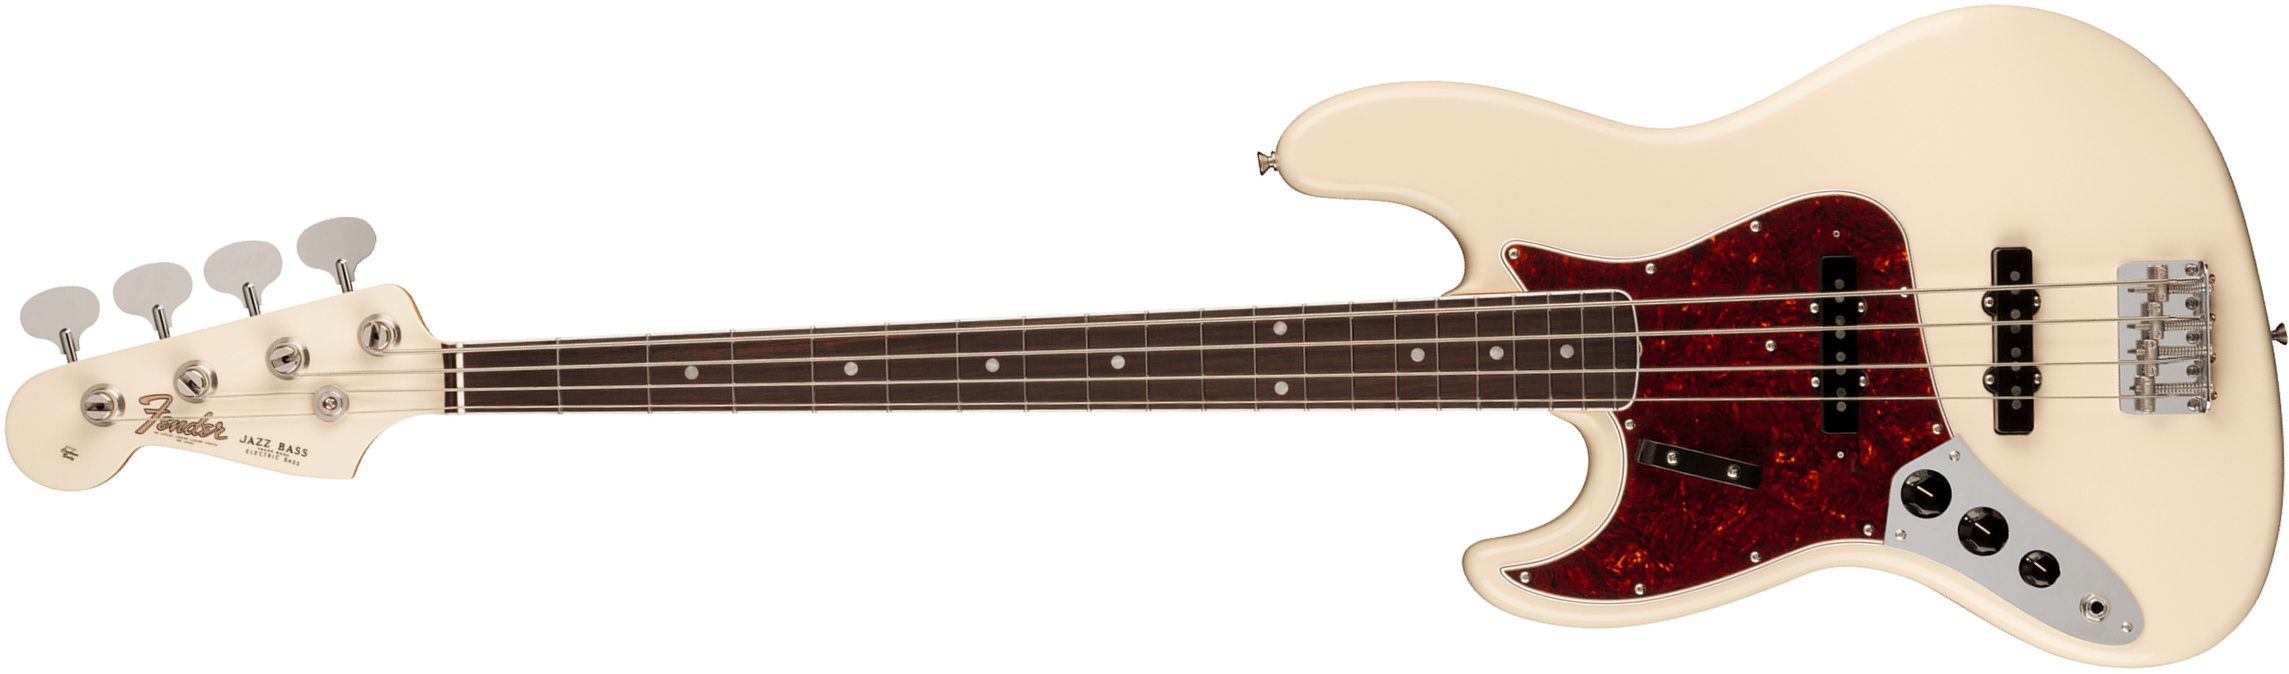 Fender Jazz Bass 1966 American Vintage Ii Lh Gaucher Usa Rw - Olympic White - Solidbody E-bass - Main picture